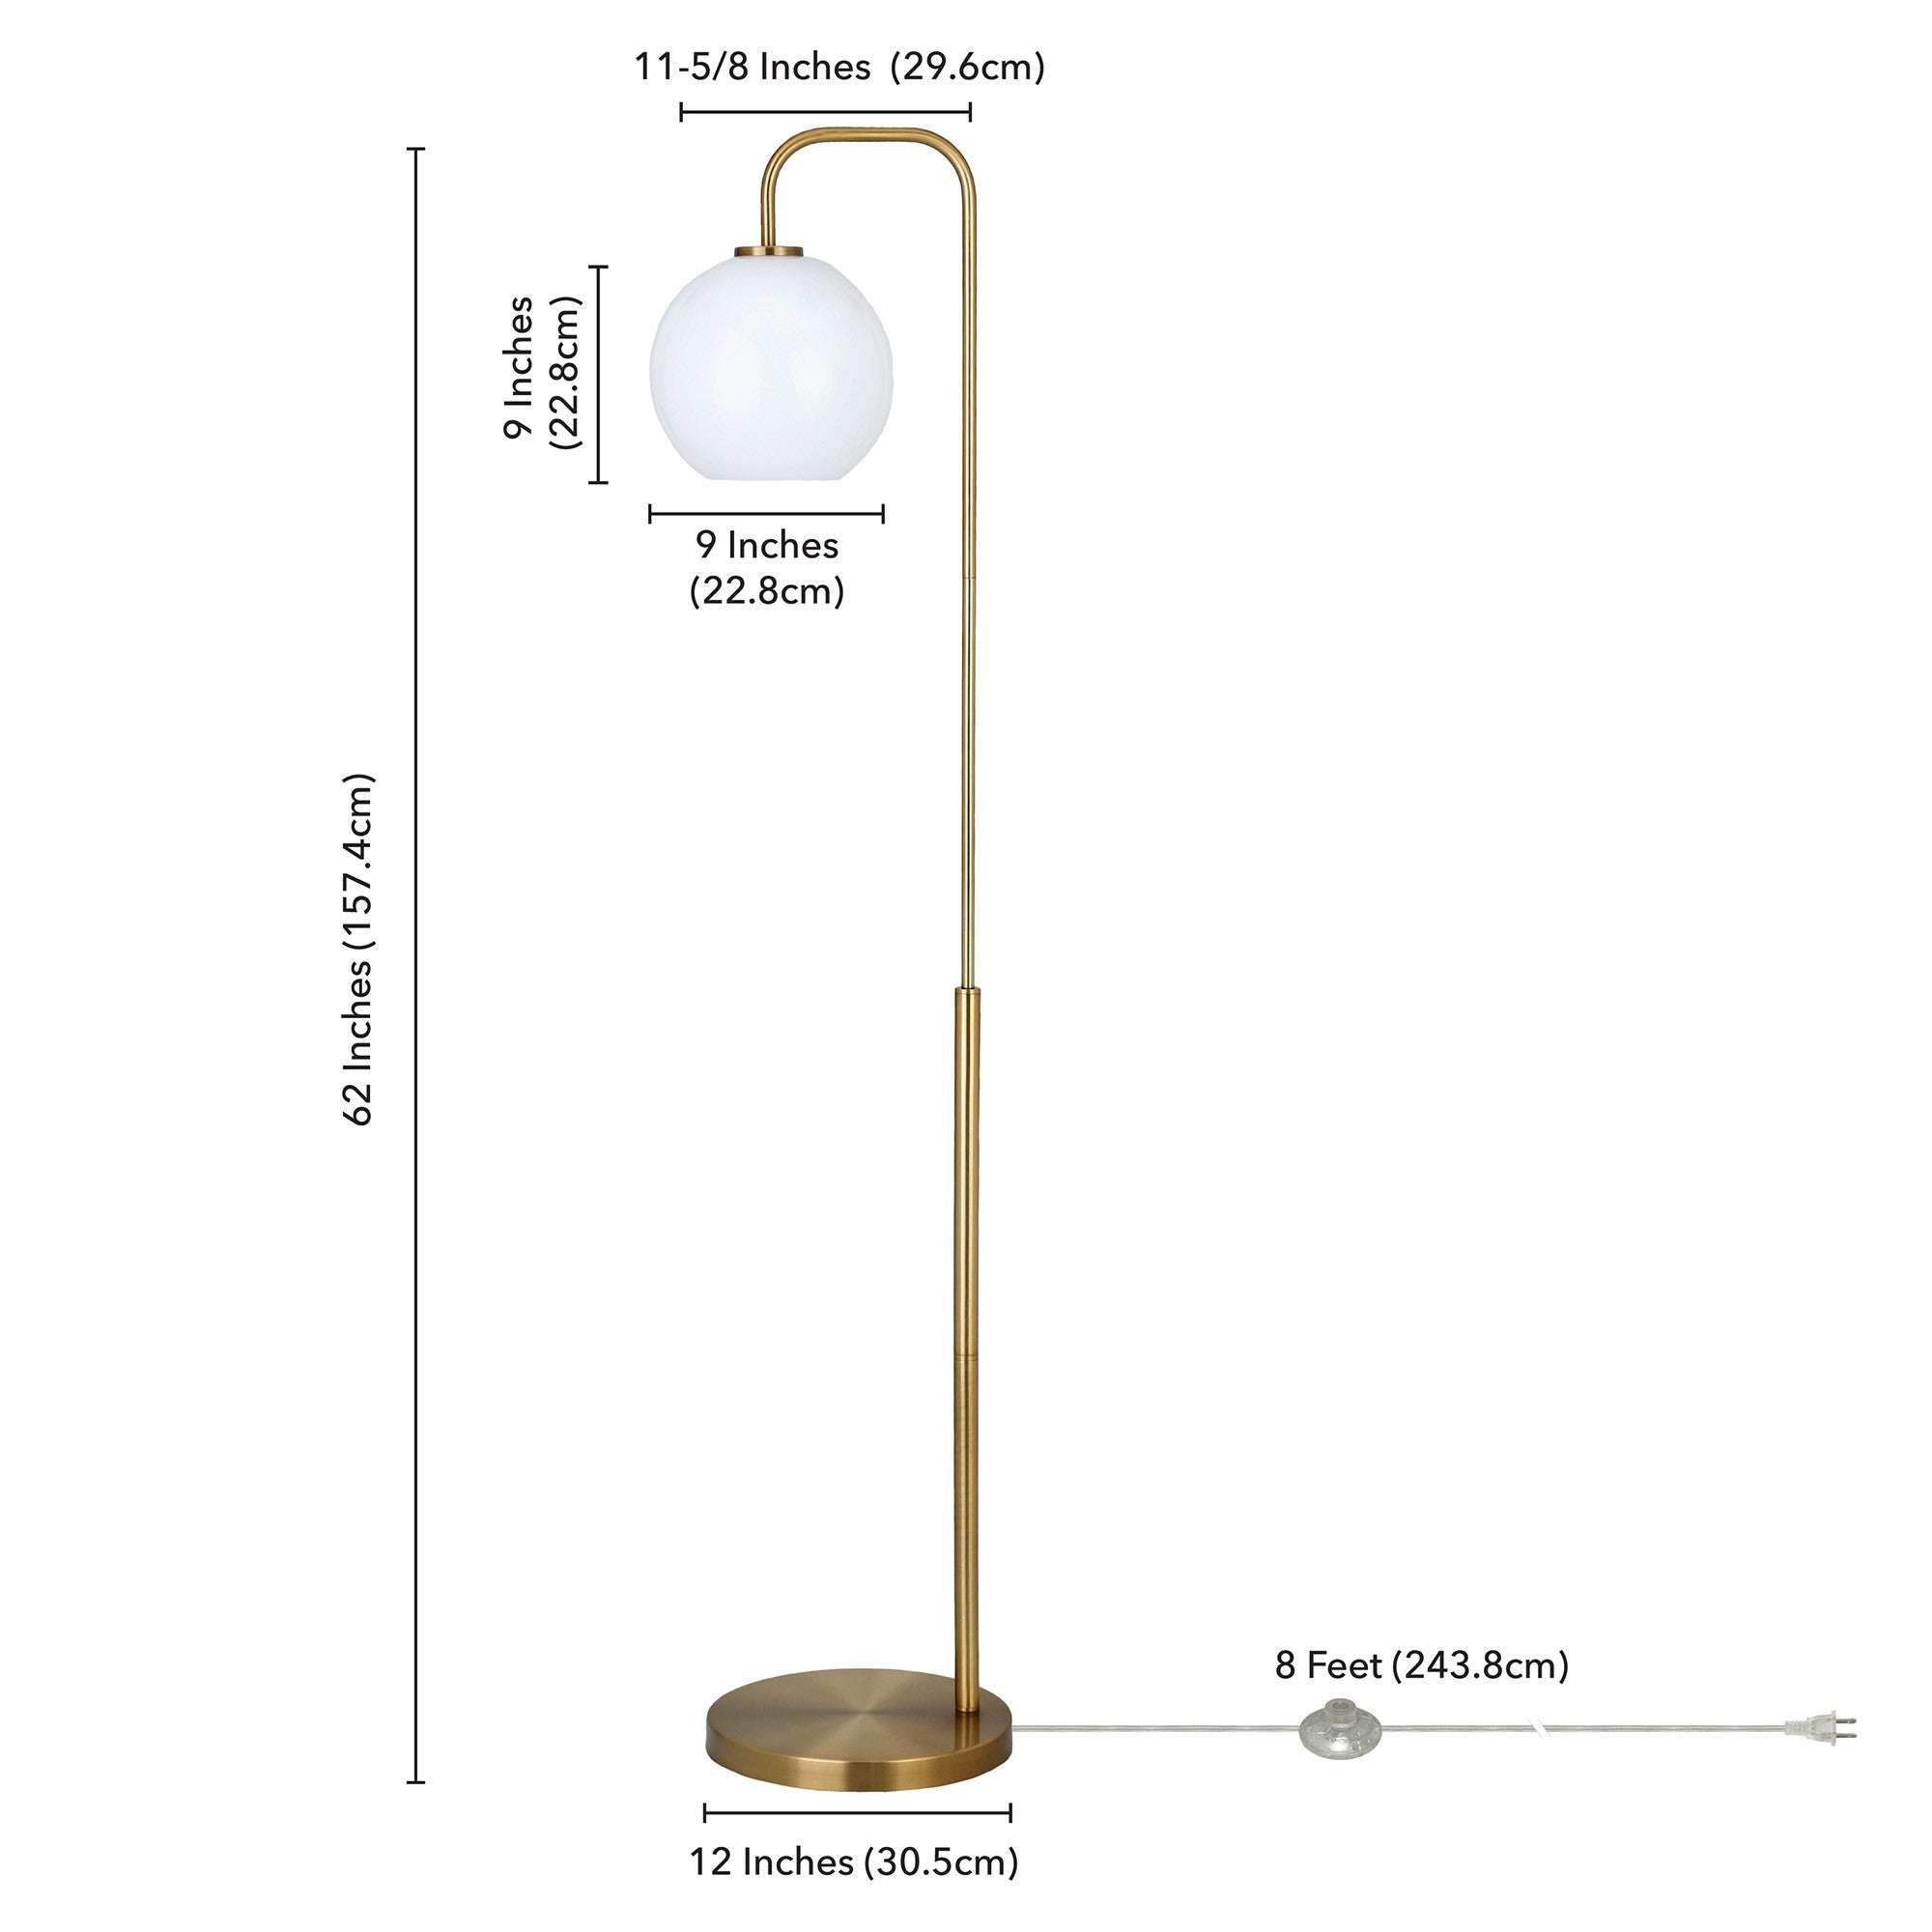 62" Brass Arched Floor Lamp With White Frosted Glass Globe Shade